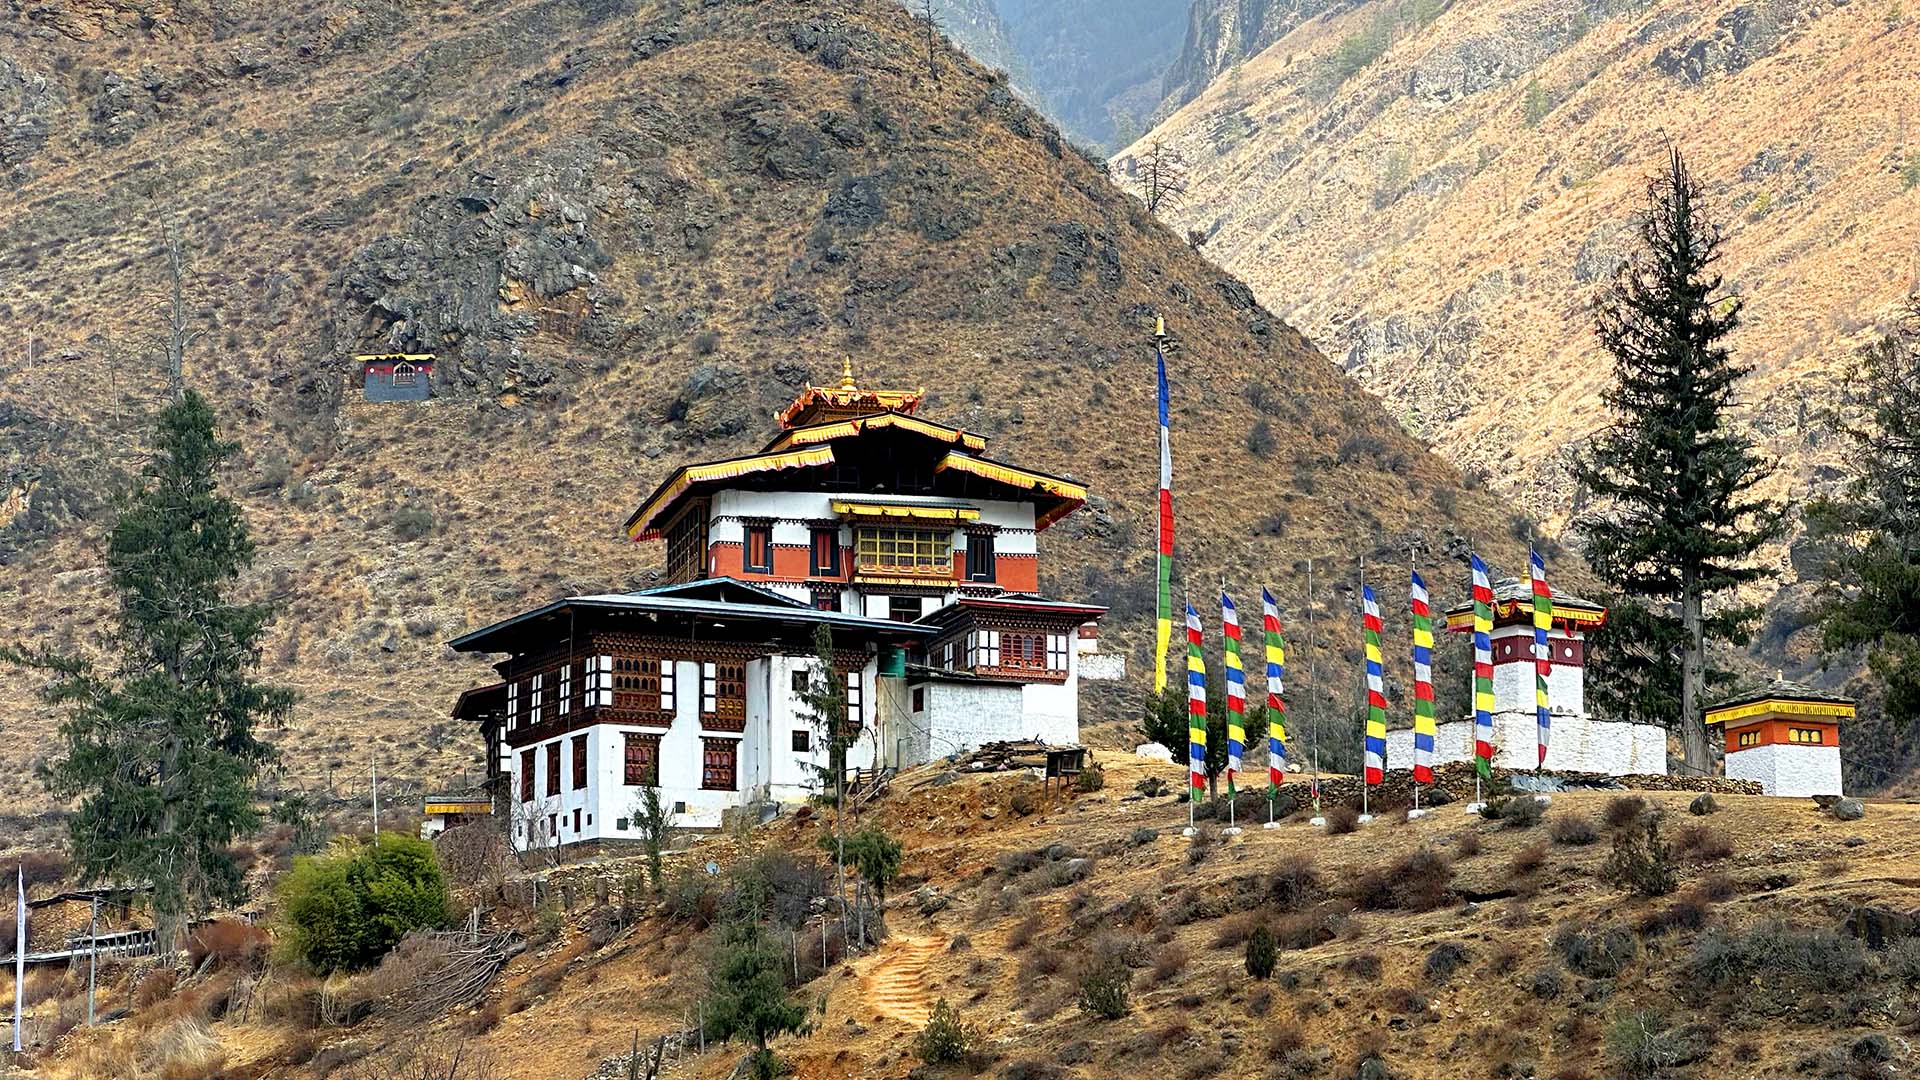 View of a temple-style building within steep mountains